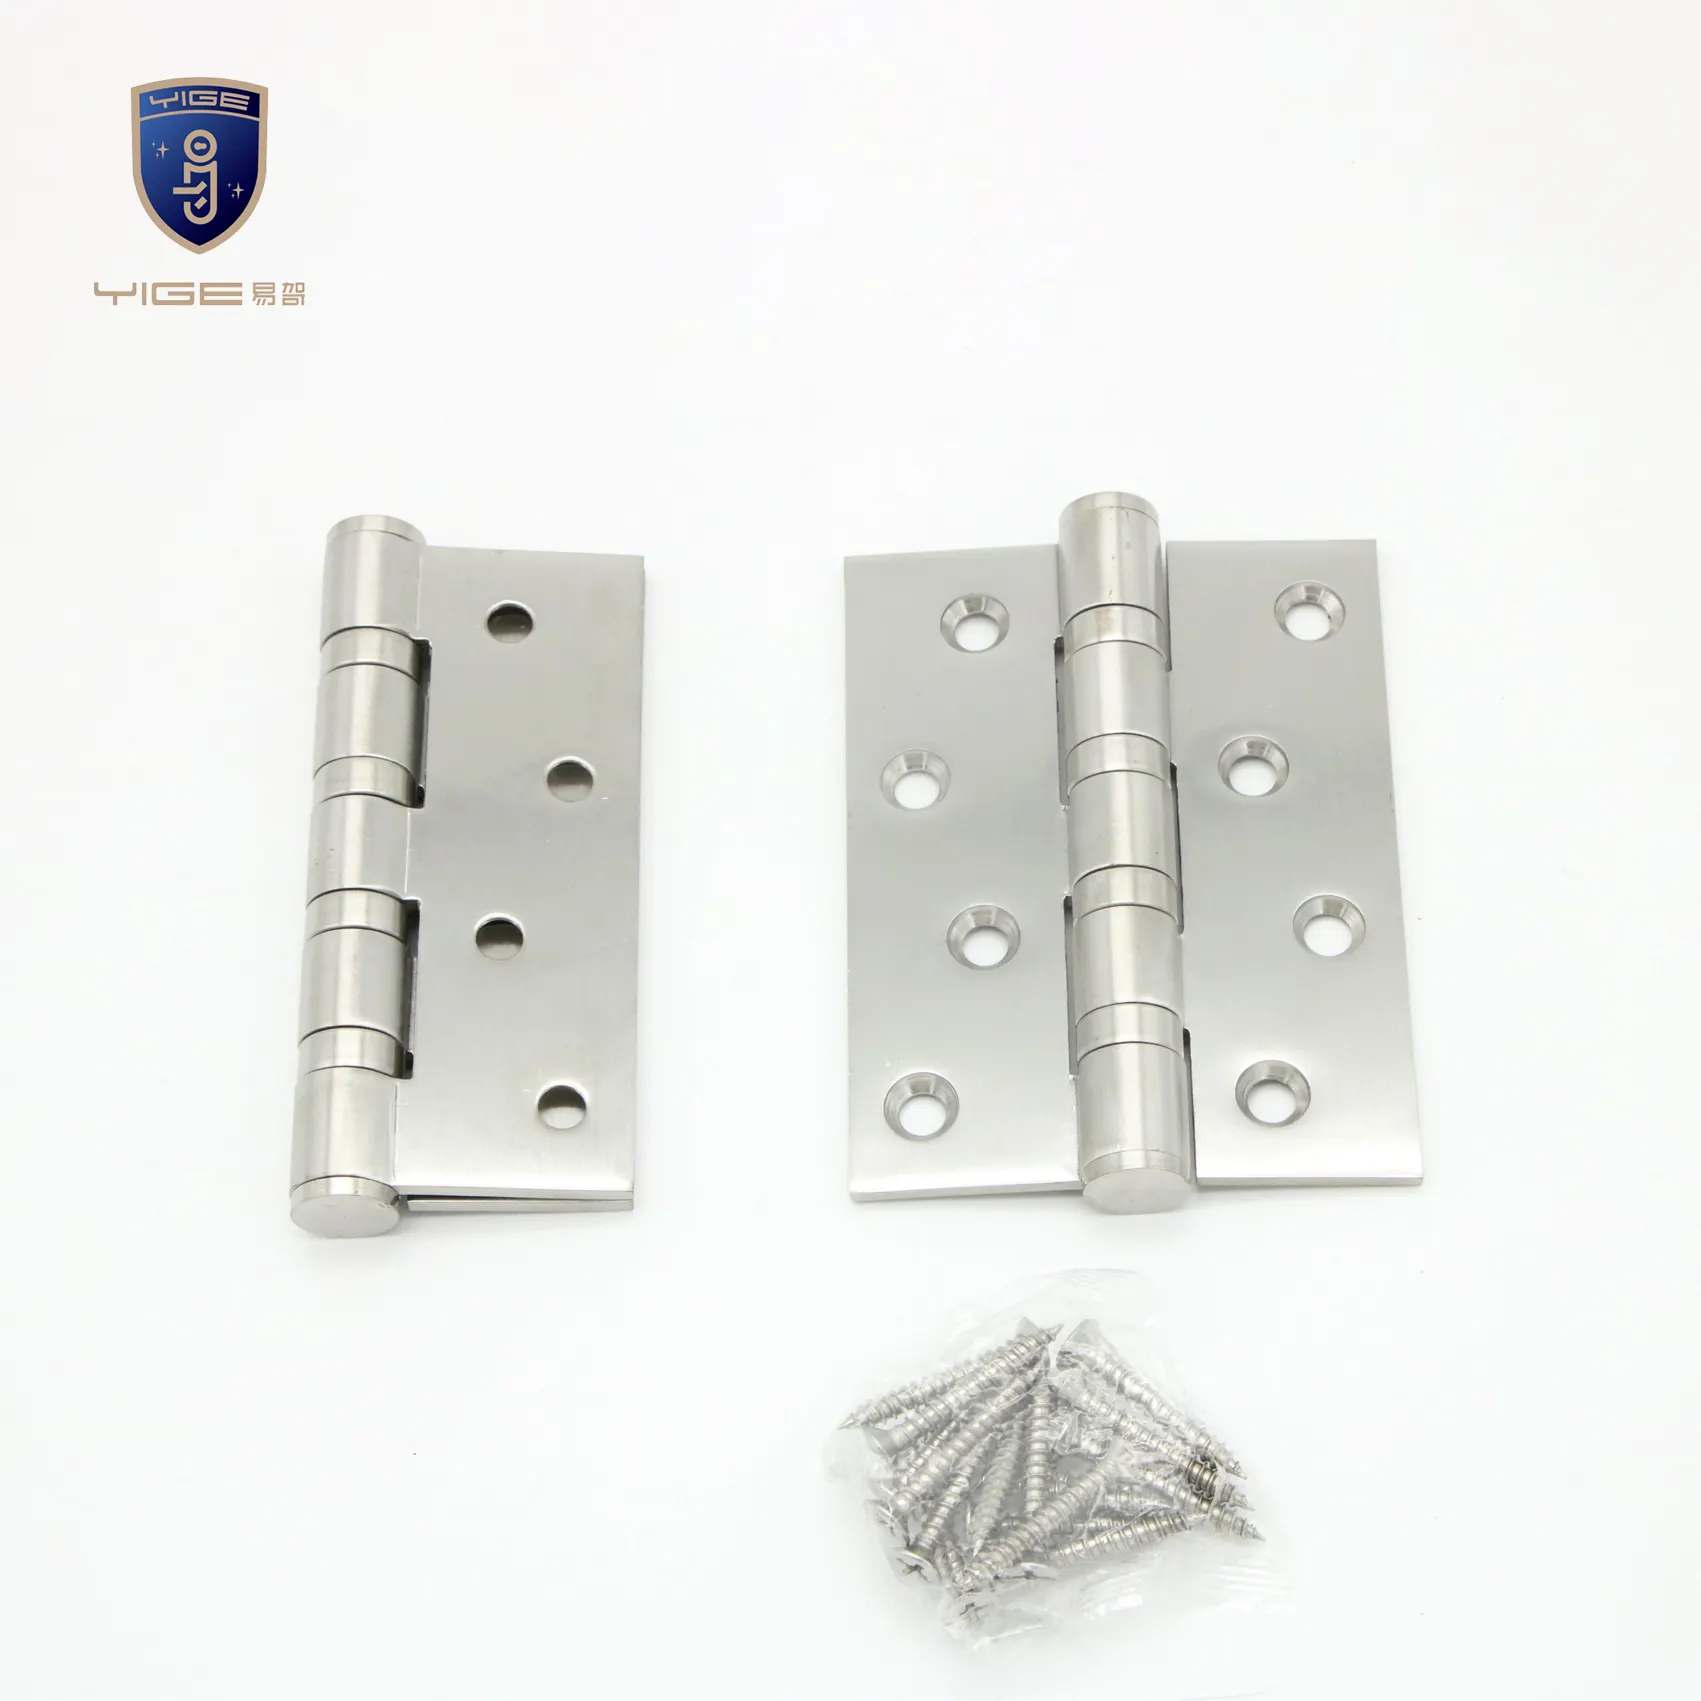 4"*3"*3" pretty good quality hinge construction door 201 SS hardware accessories hot sale hinge manufacturer